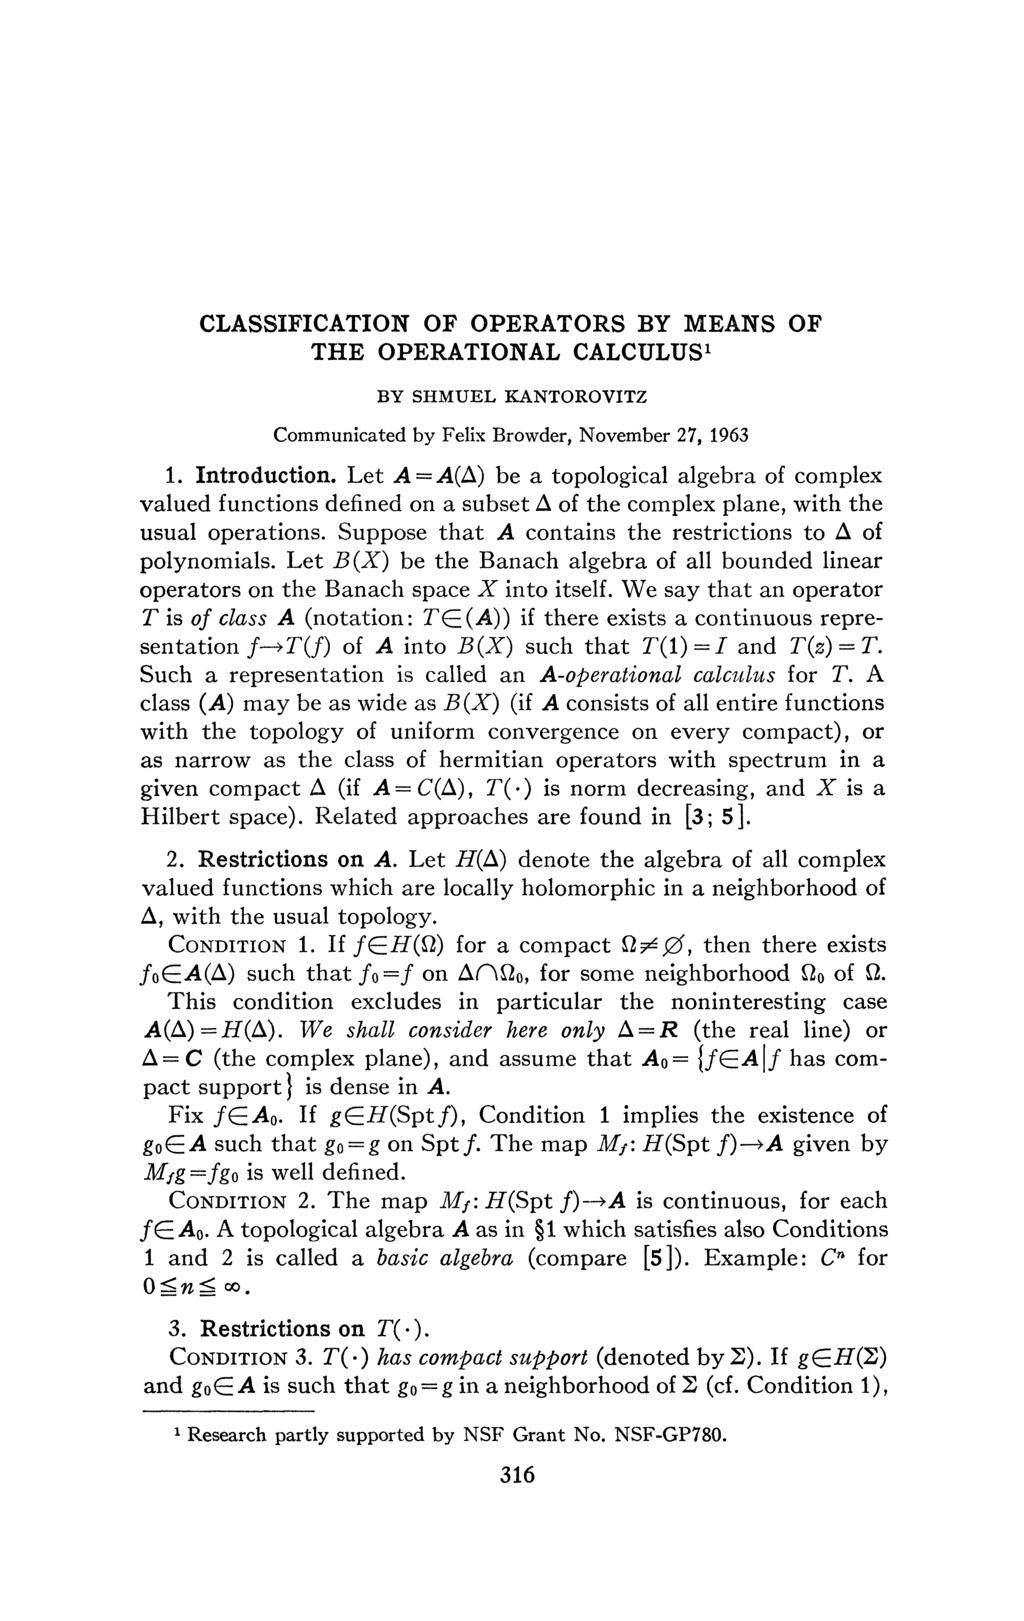 CLASSIFICATION OF OPERATORS BY MEANS OF THE OPERATIONAL CALCULUS 1 BY SHMUEL KANTOROVITZ Communicated by Felix Browder, November 27, 1963 1. Introduction.